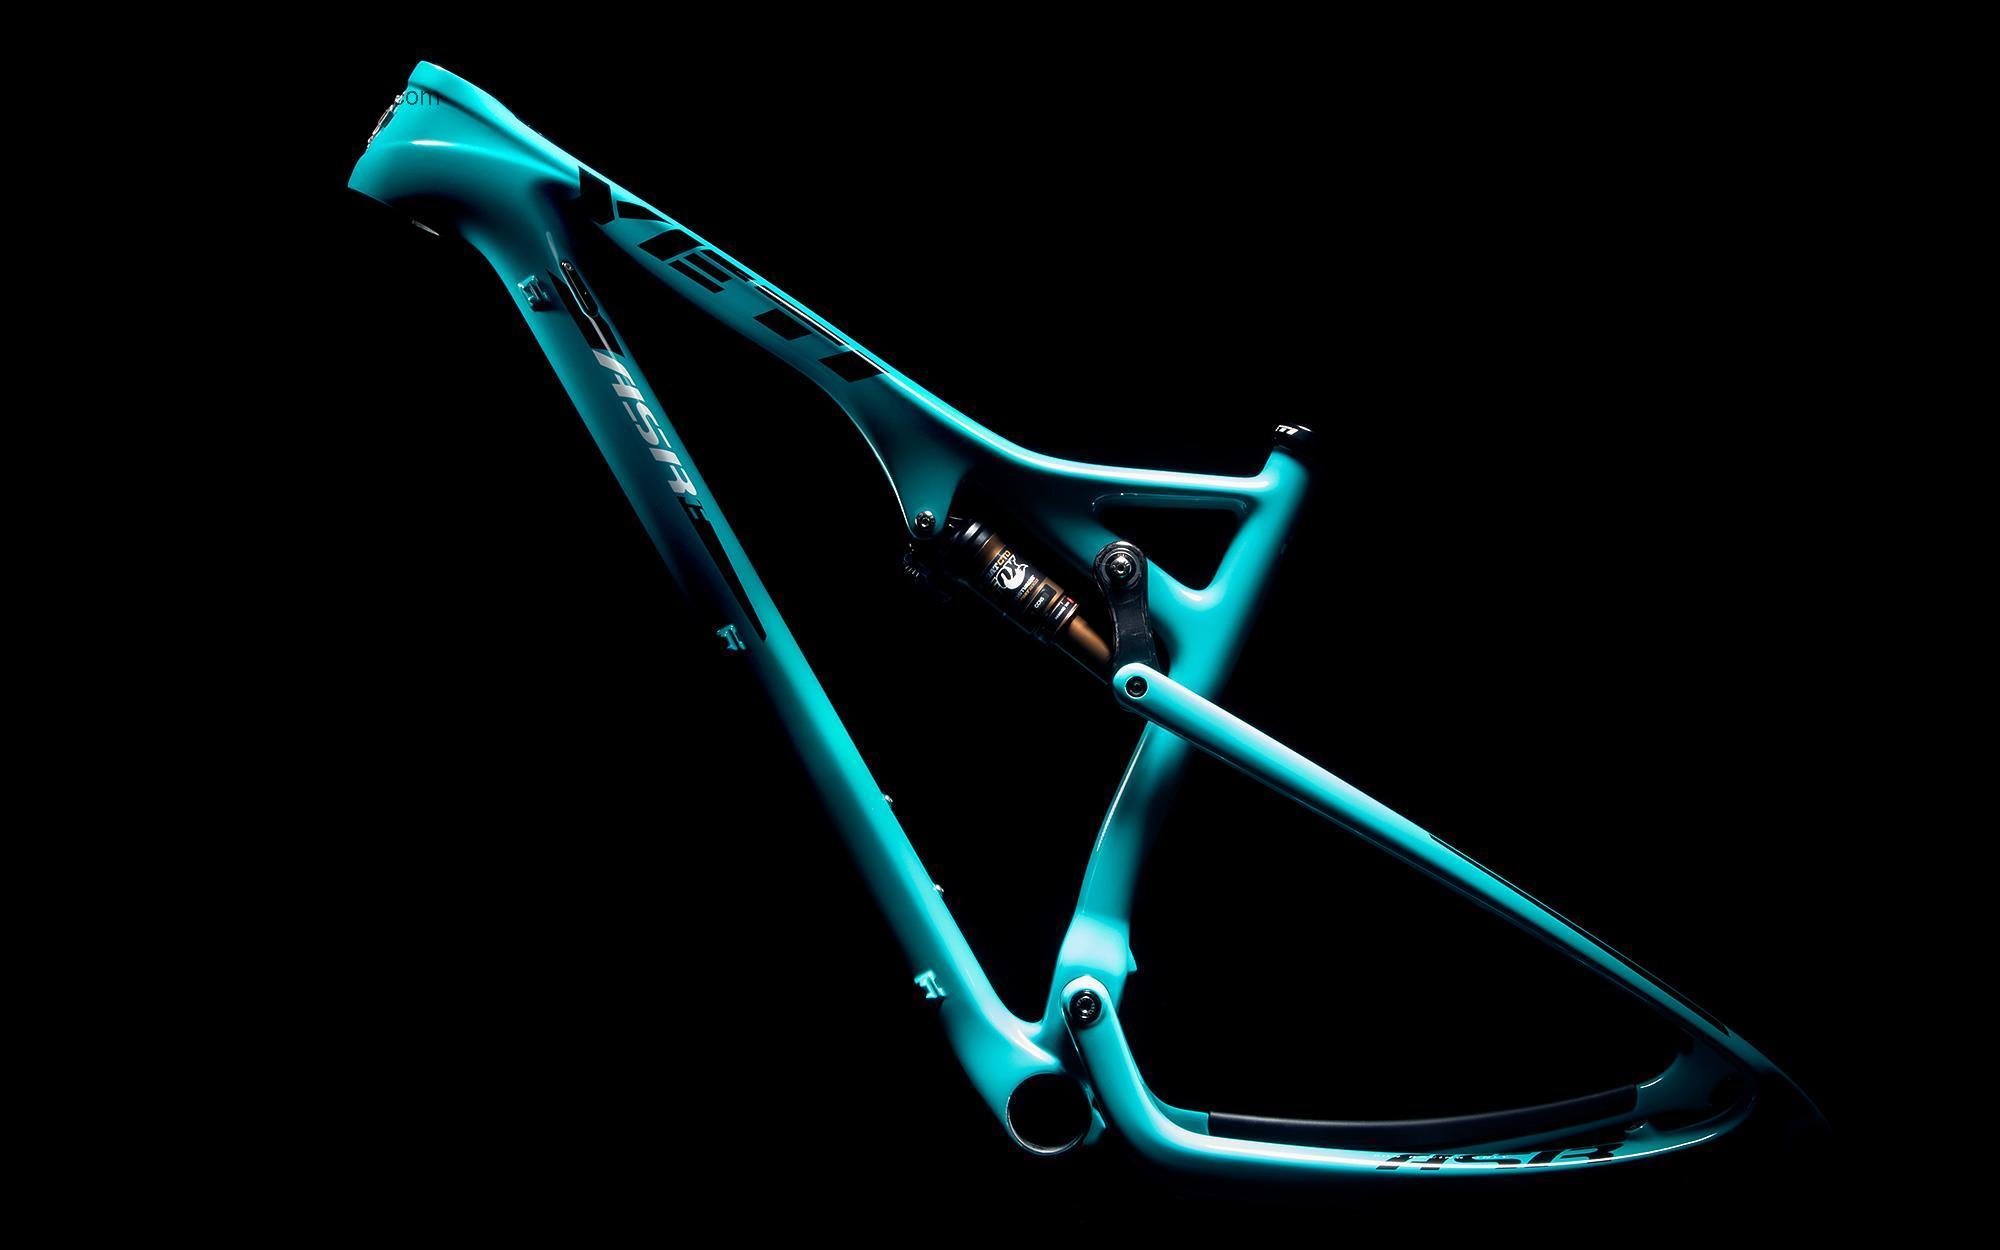 Yeti Asr Carbon FRAME ONLY 2015 comparison online with competitors